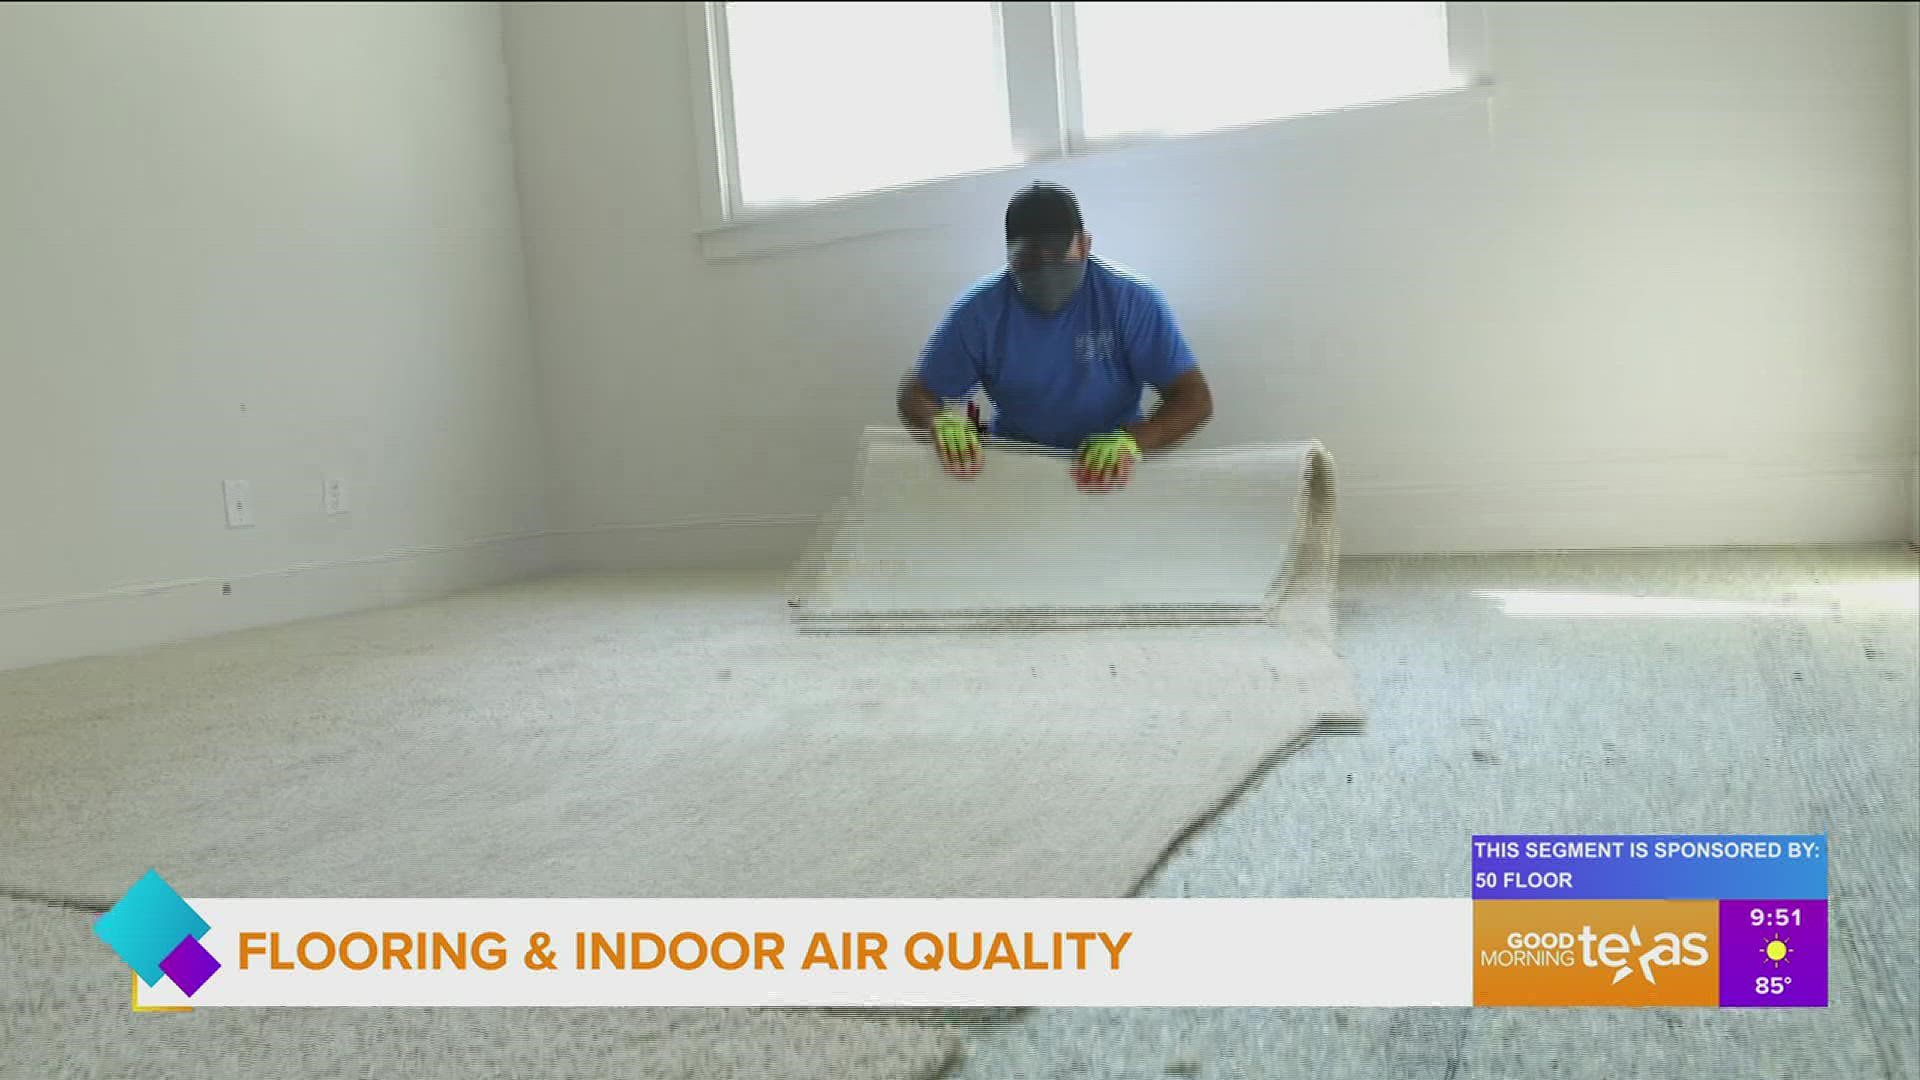 What flooring to consider when considering indoor air quality